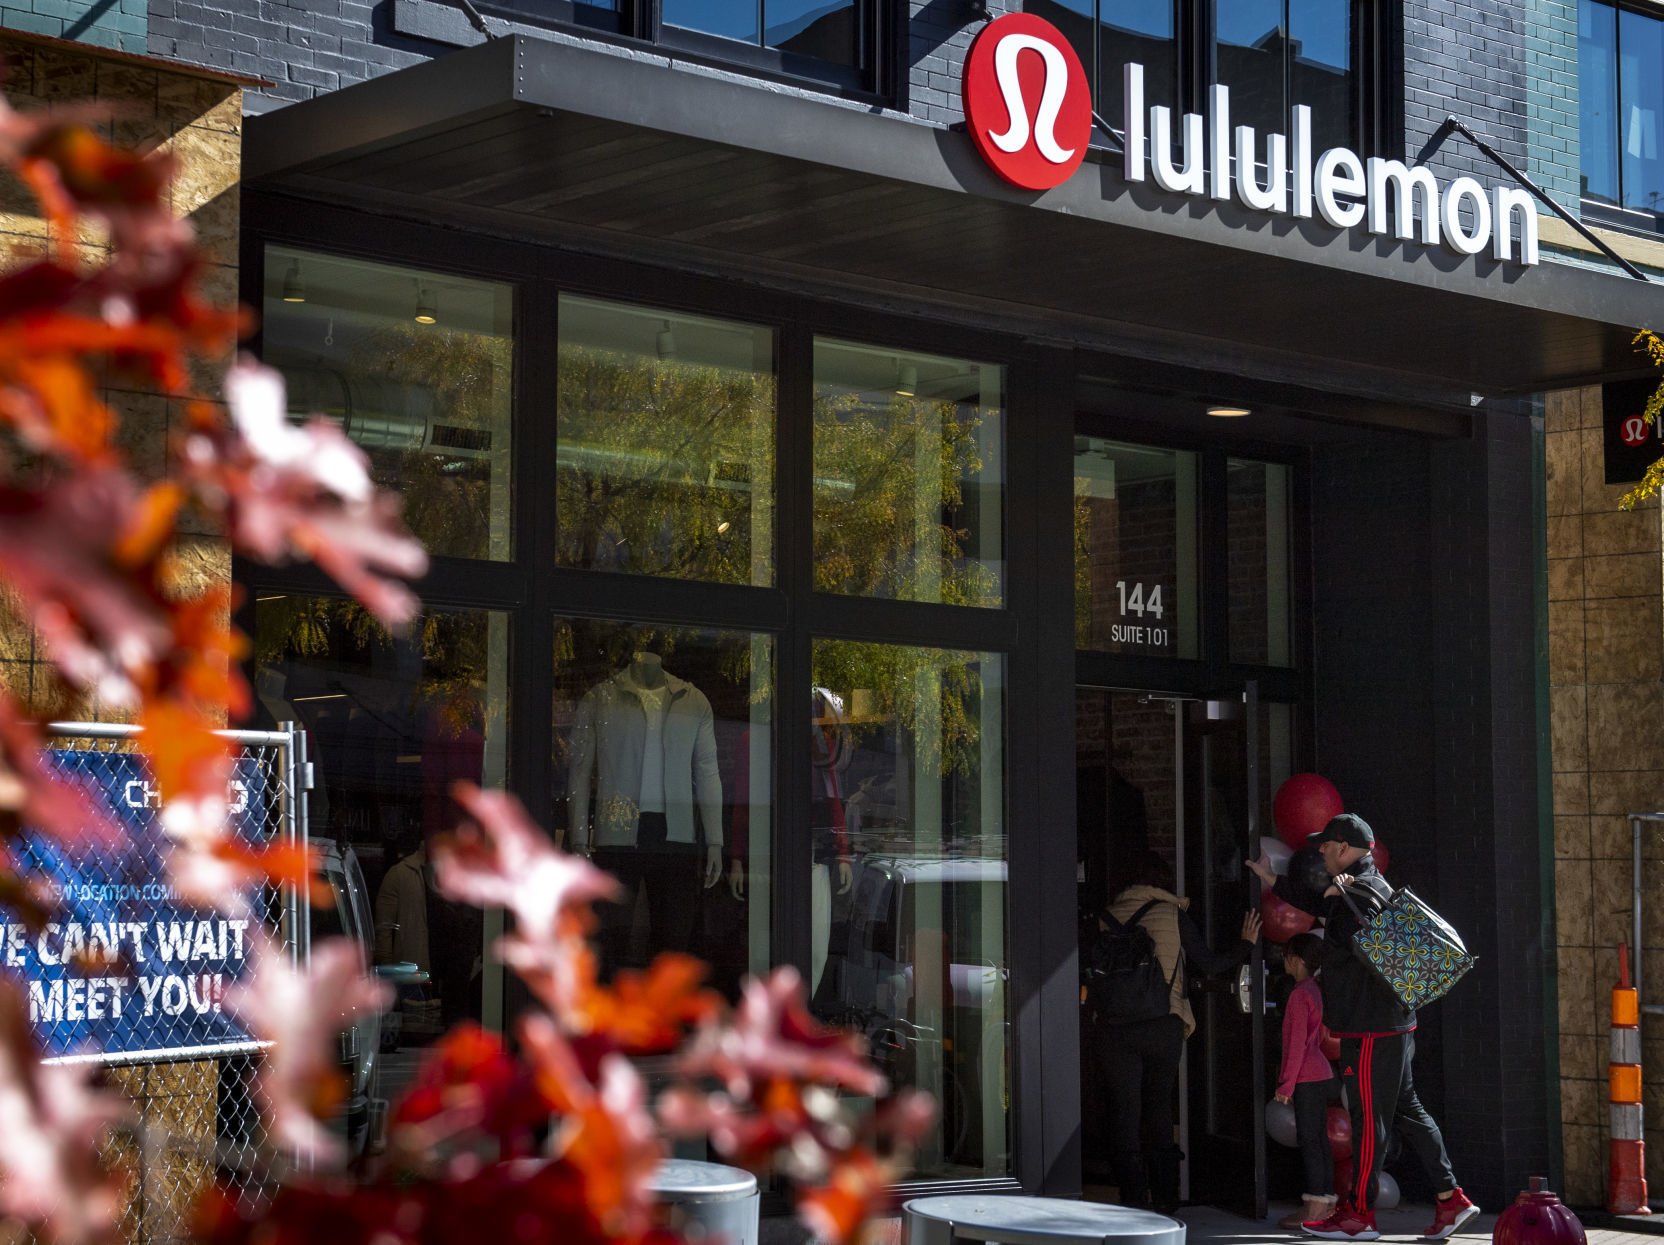 lululemon friends and family discount 2018